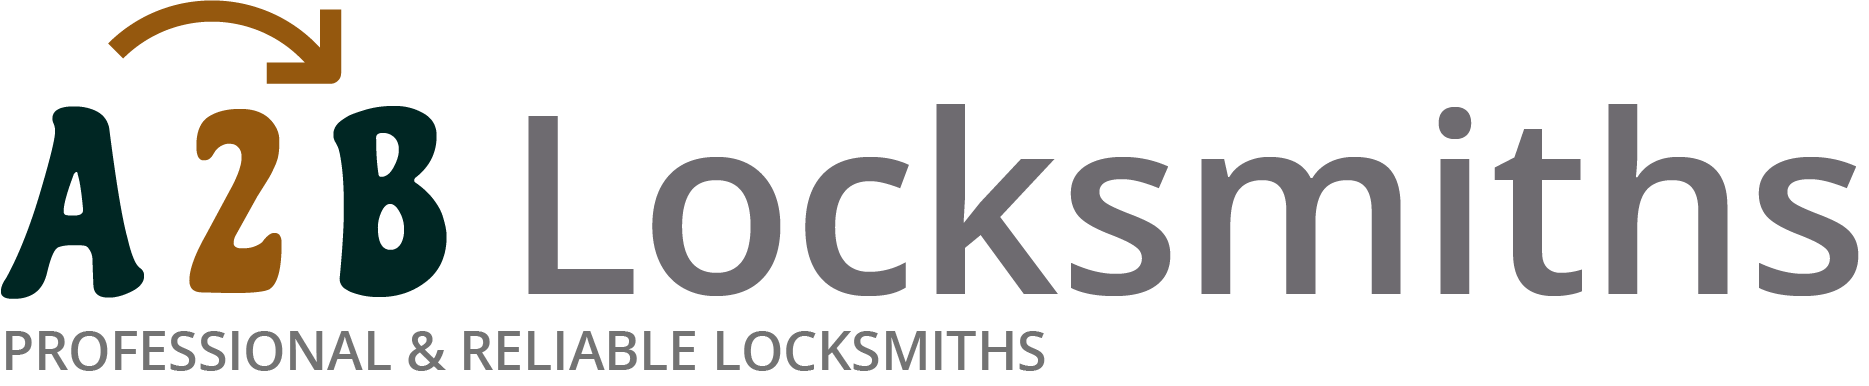 If you are locked out of house in Chipping Barnet, our 24/7 local emergency locksmith services can help you.